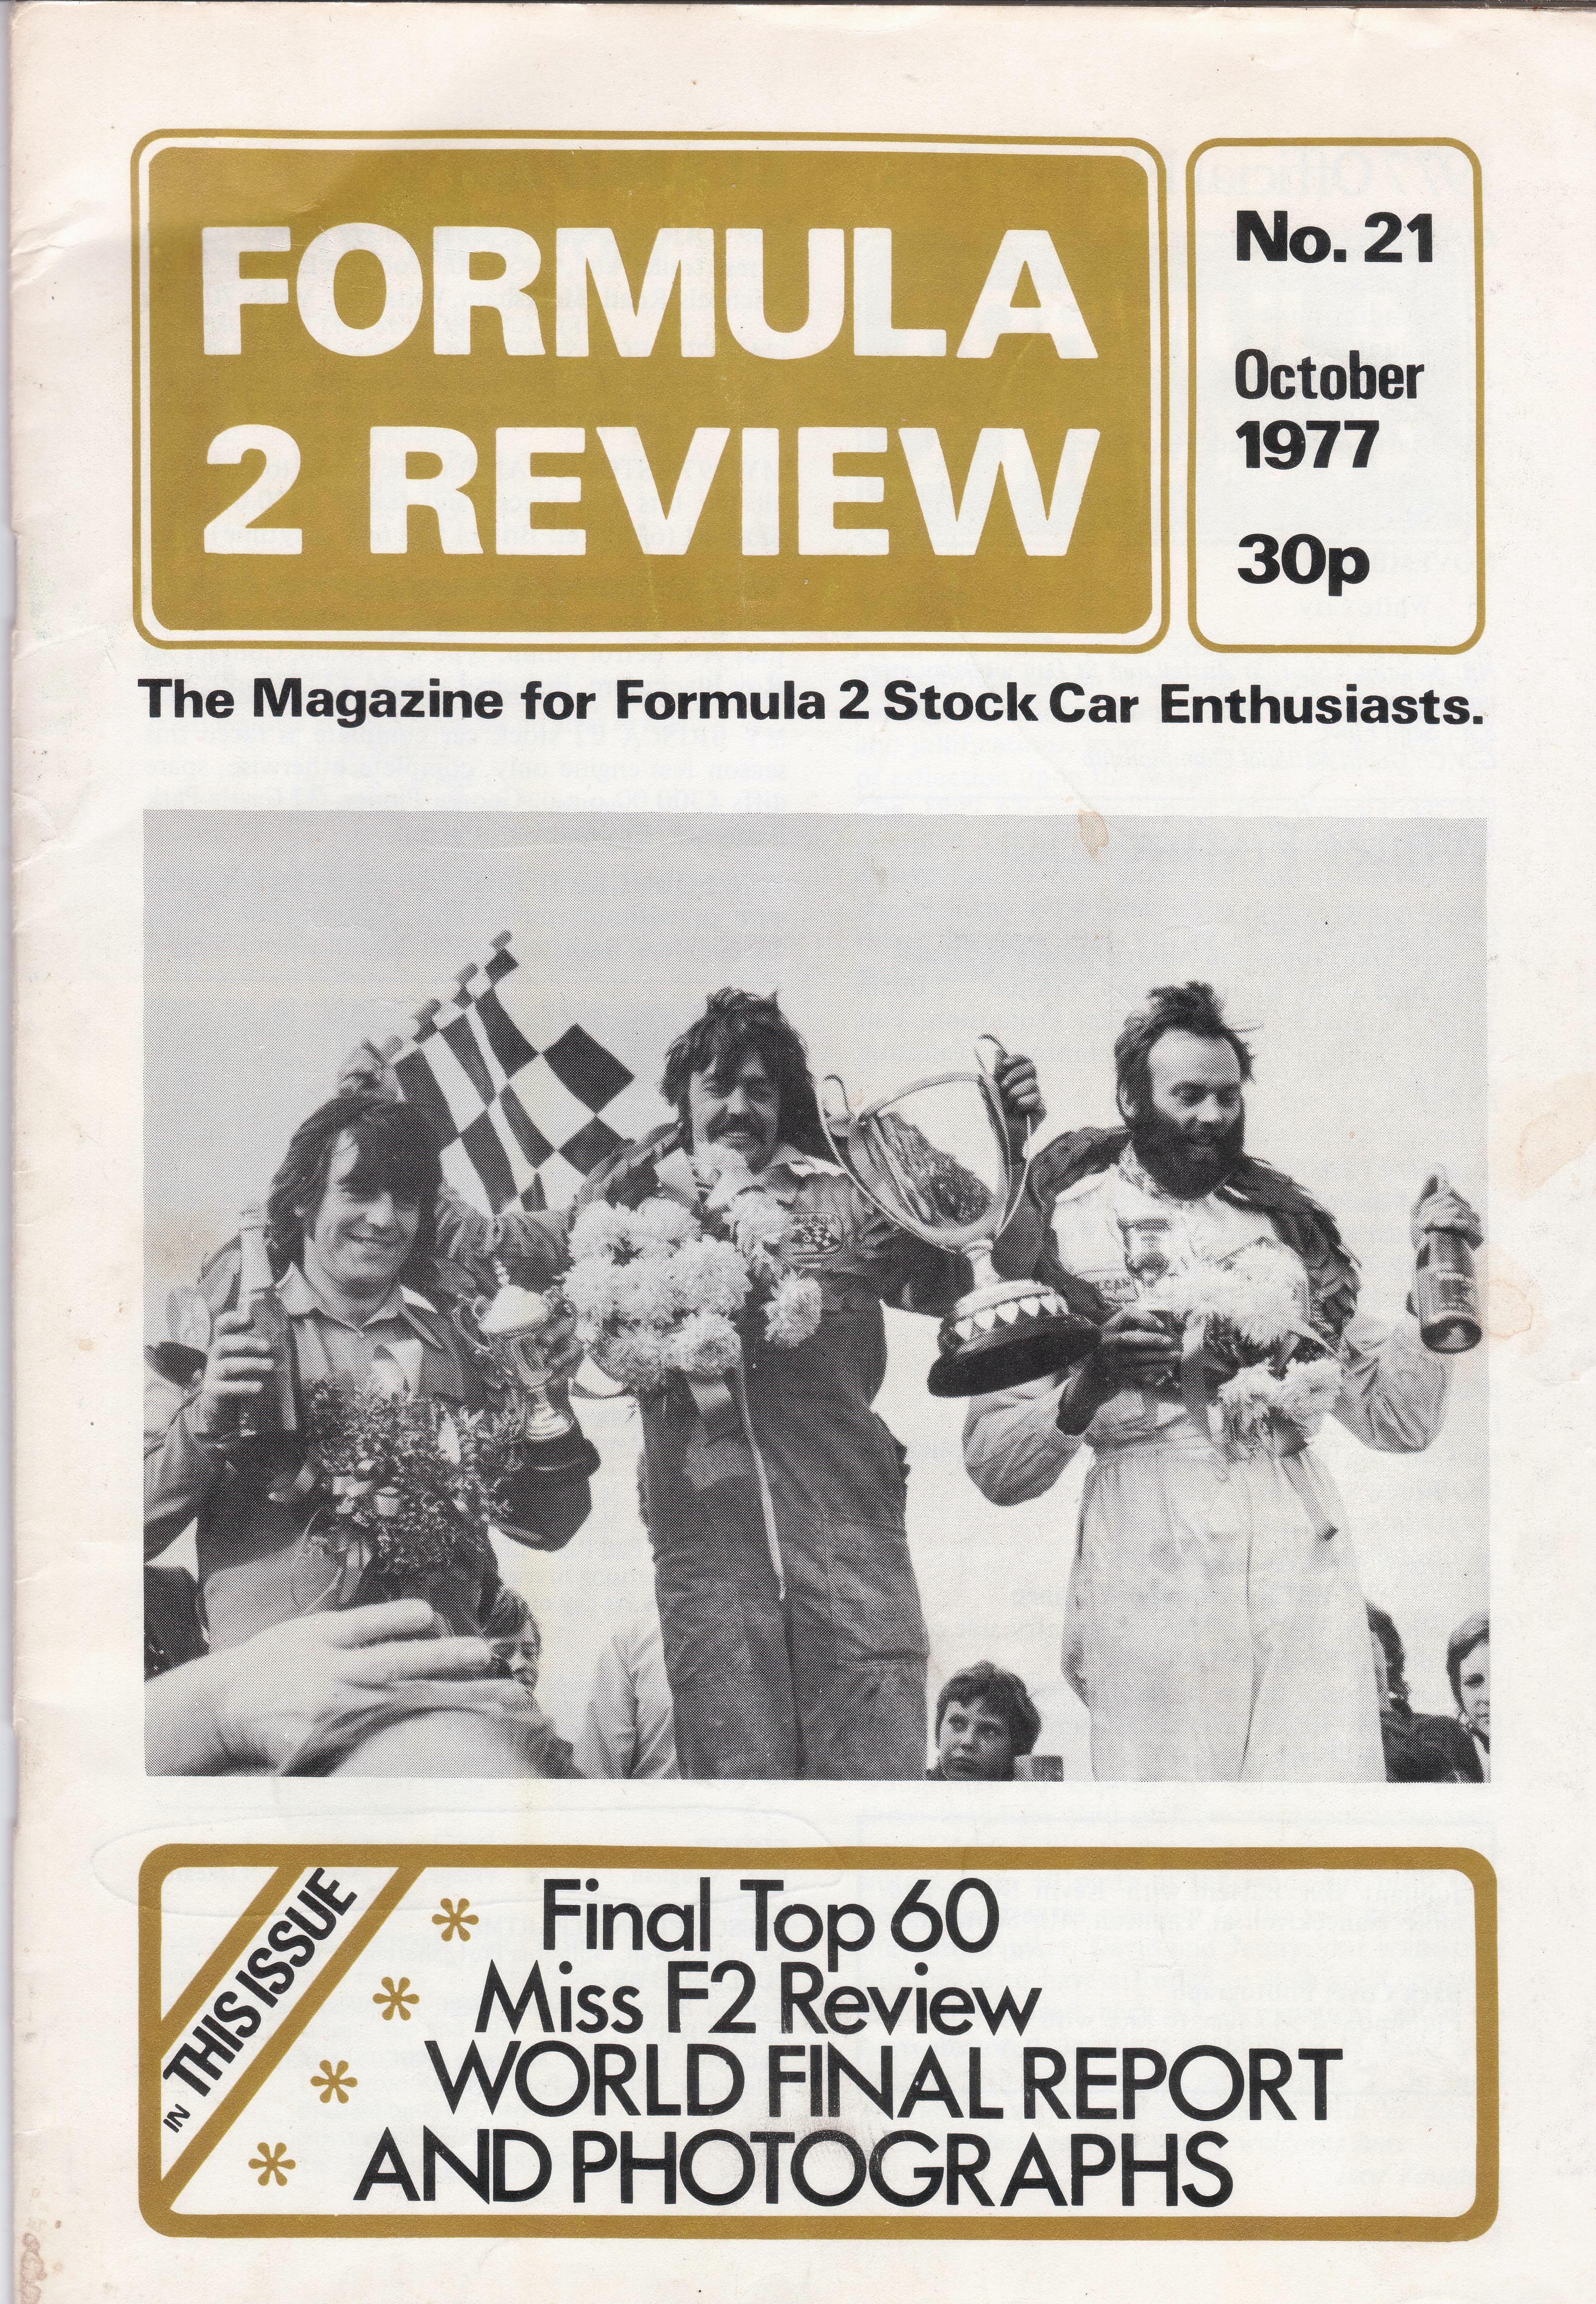 f2 review mag cover